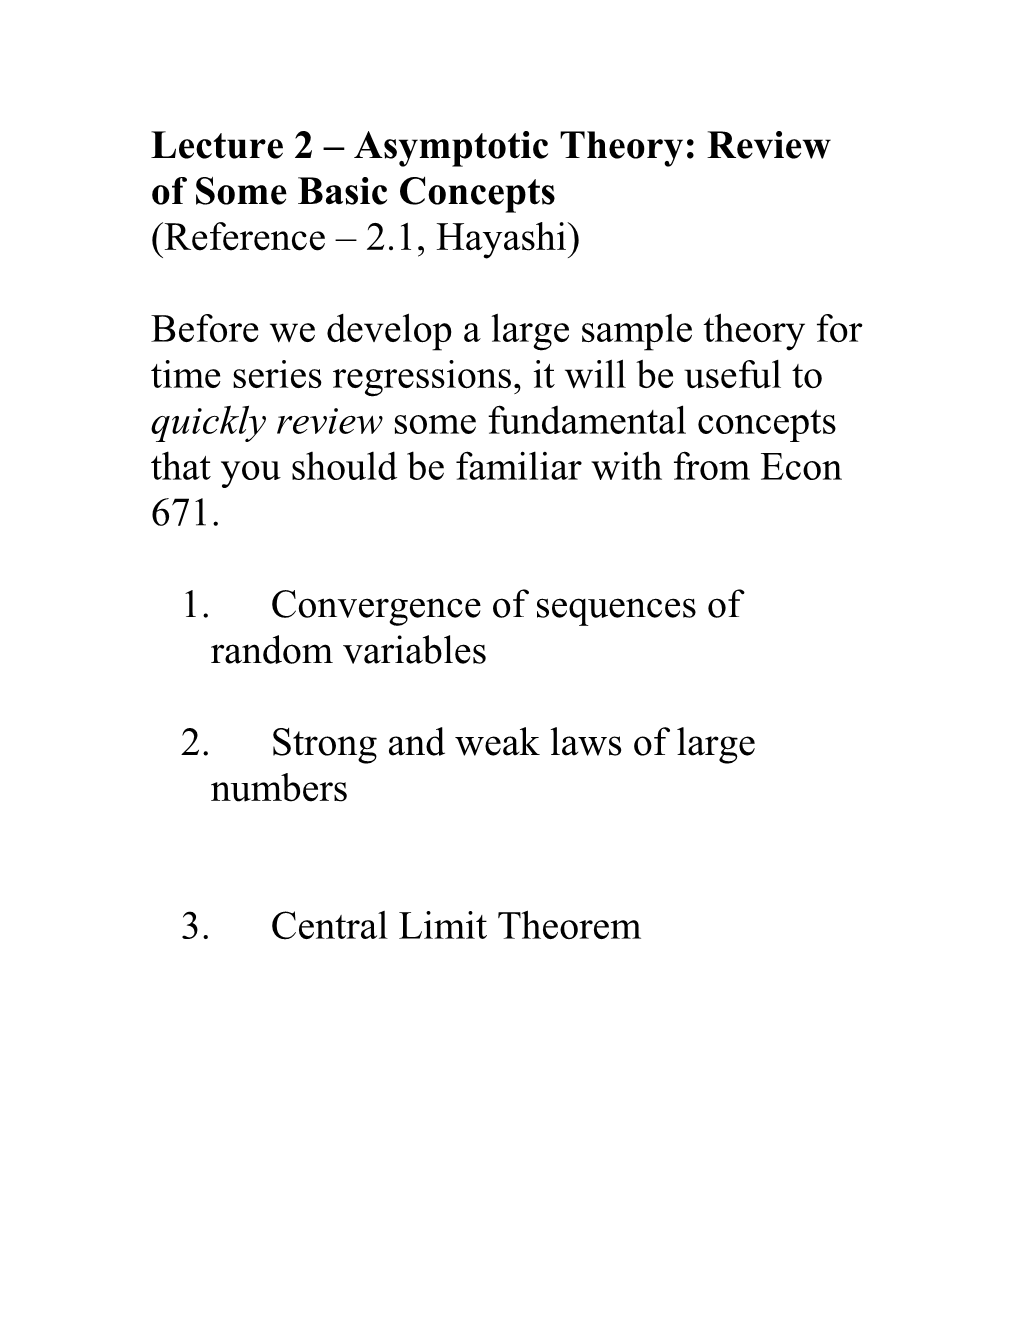 Lecture 2 Asymptotic Theory: Review of Some Basic Concepts